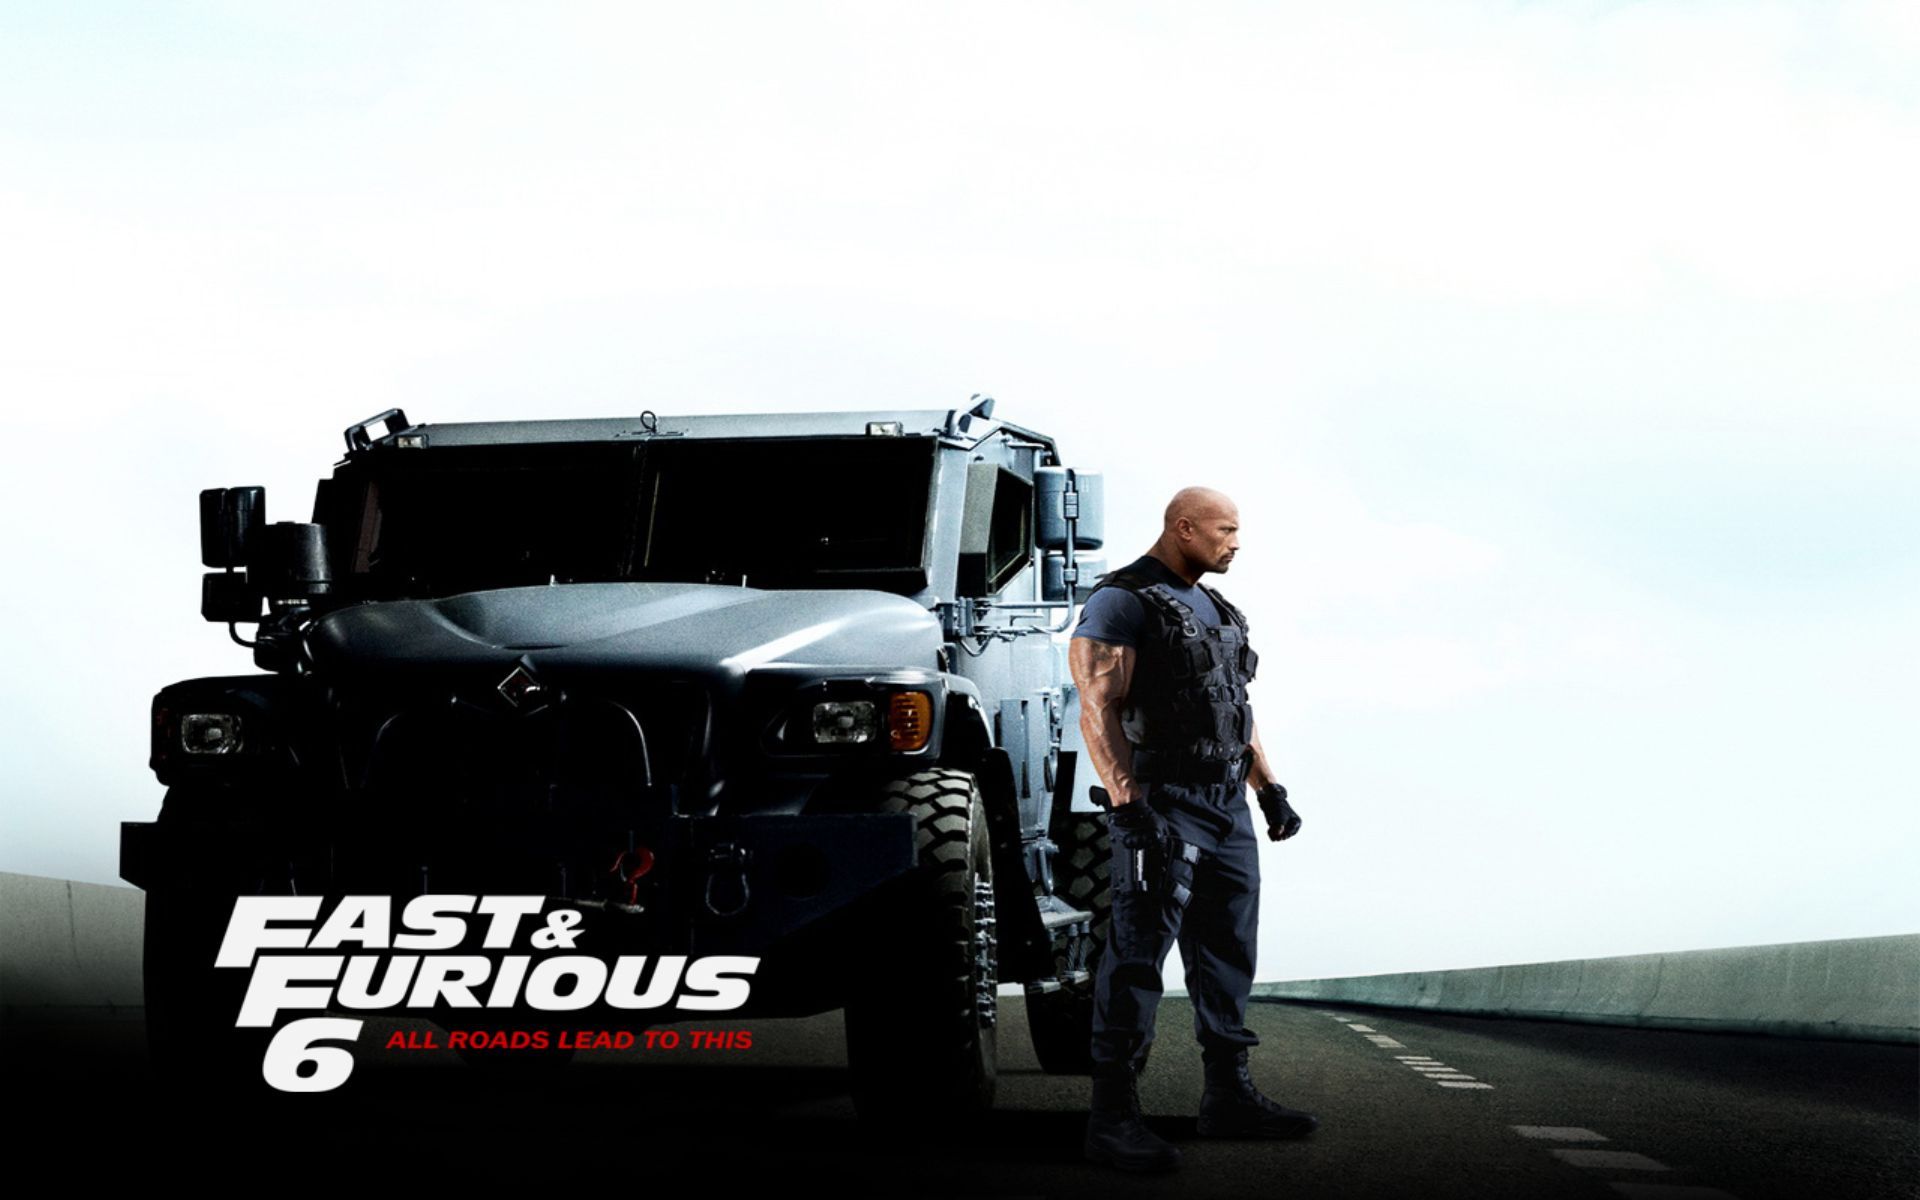 Furious 7 wallpaper in high quality - 1-7 movies